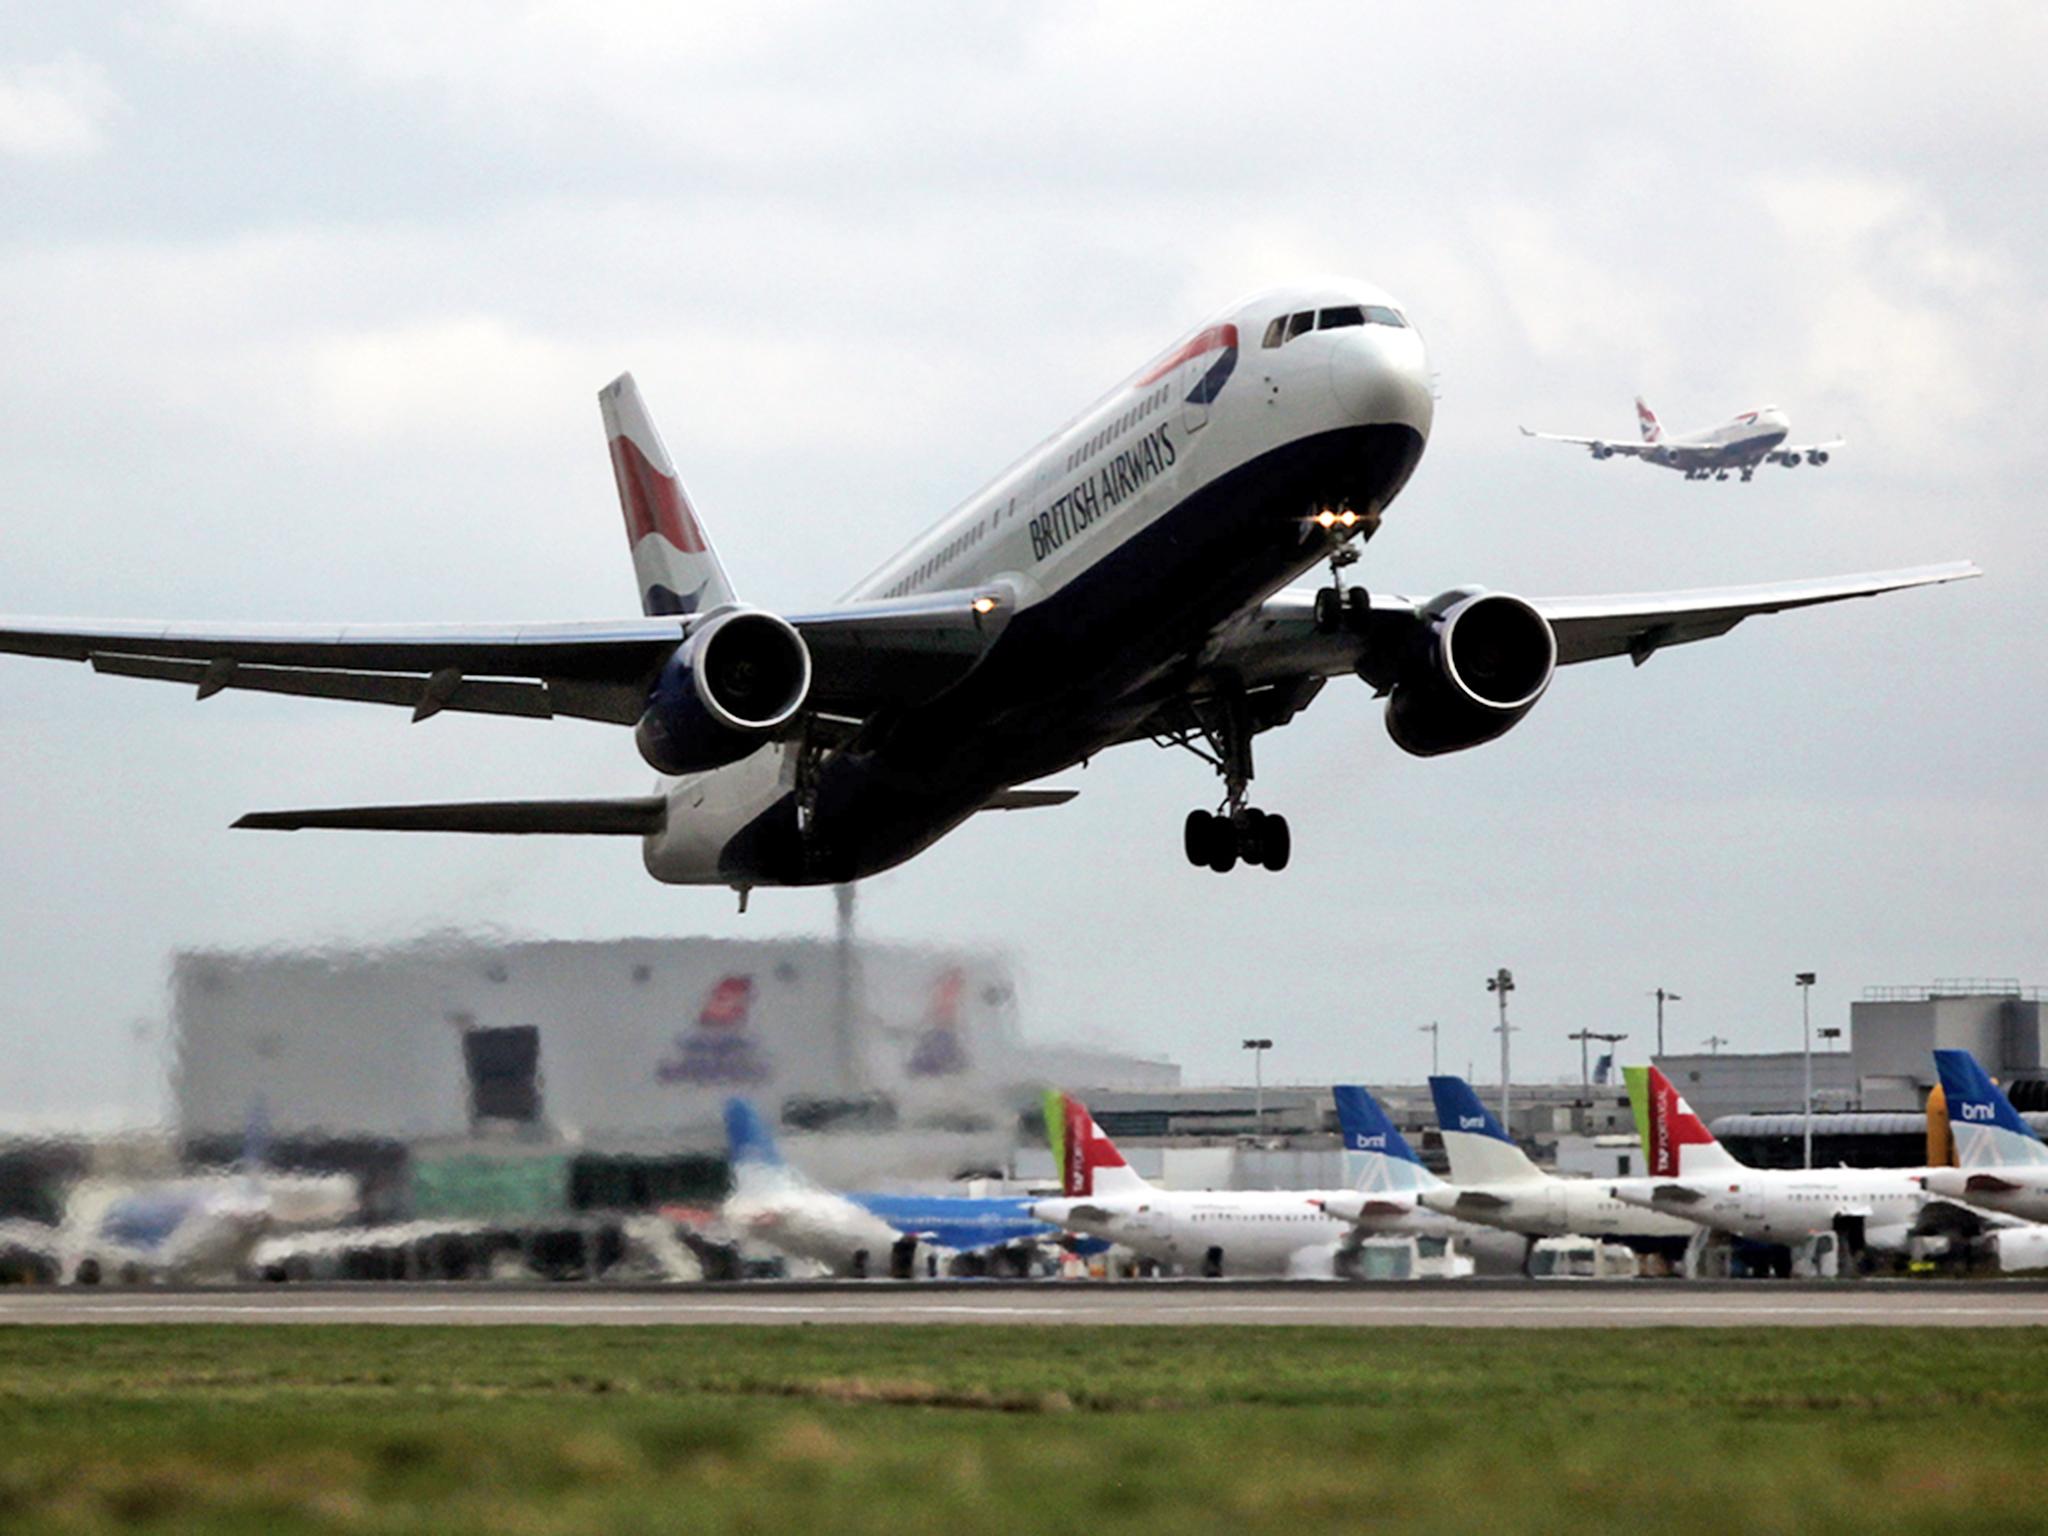 Passengers eventually took off again from Heathrow nearly 24 hours late